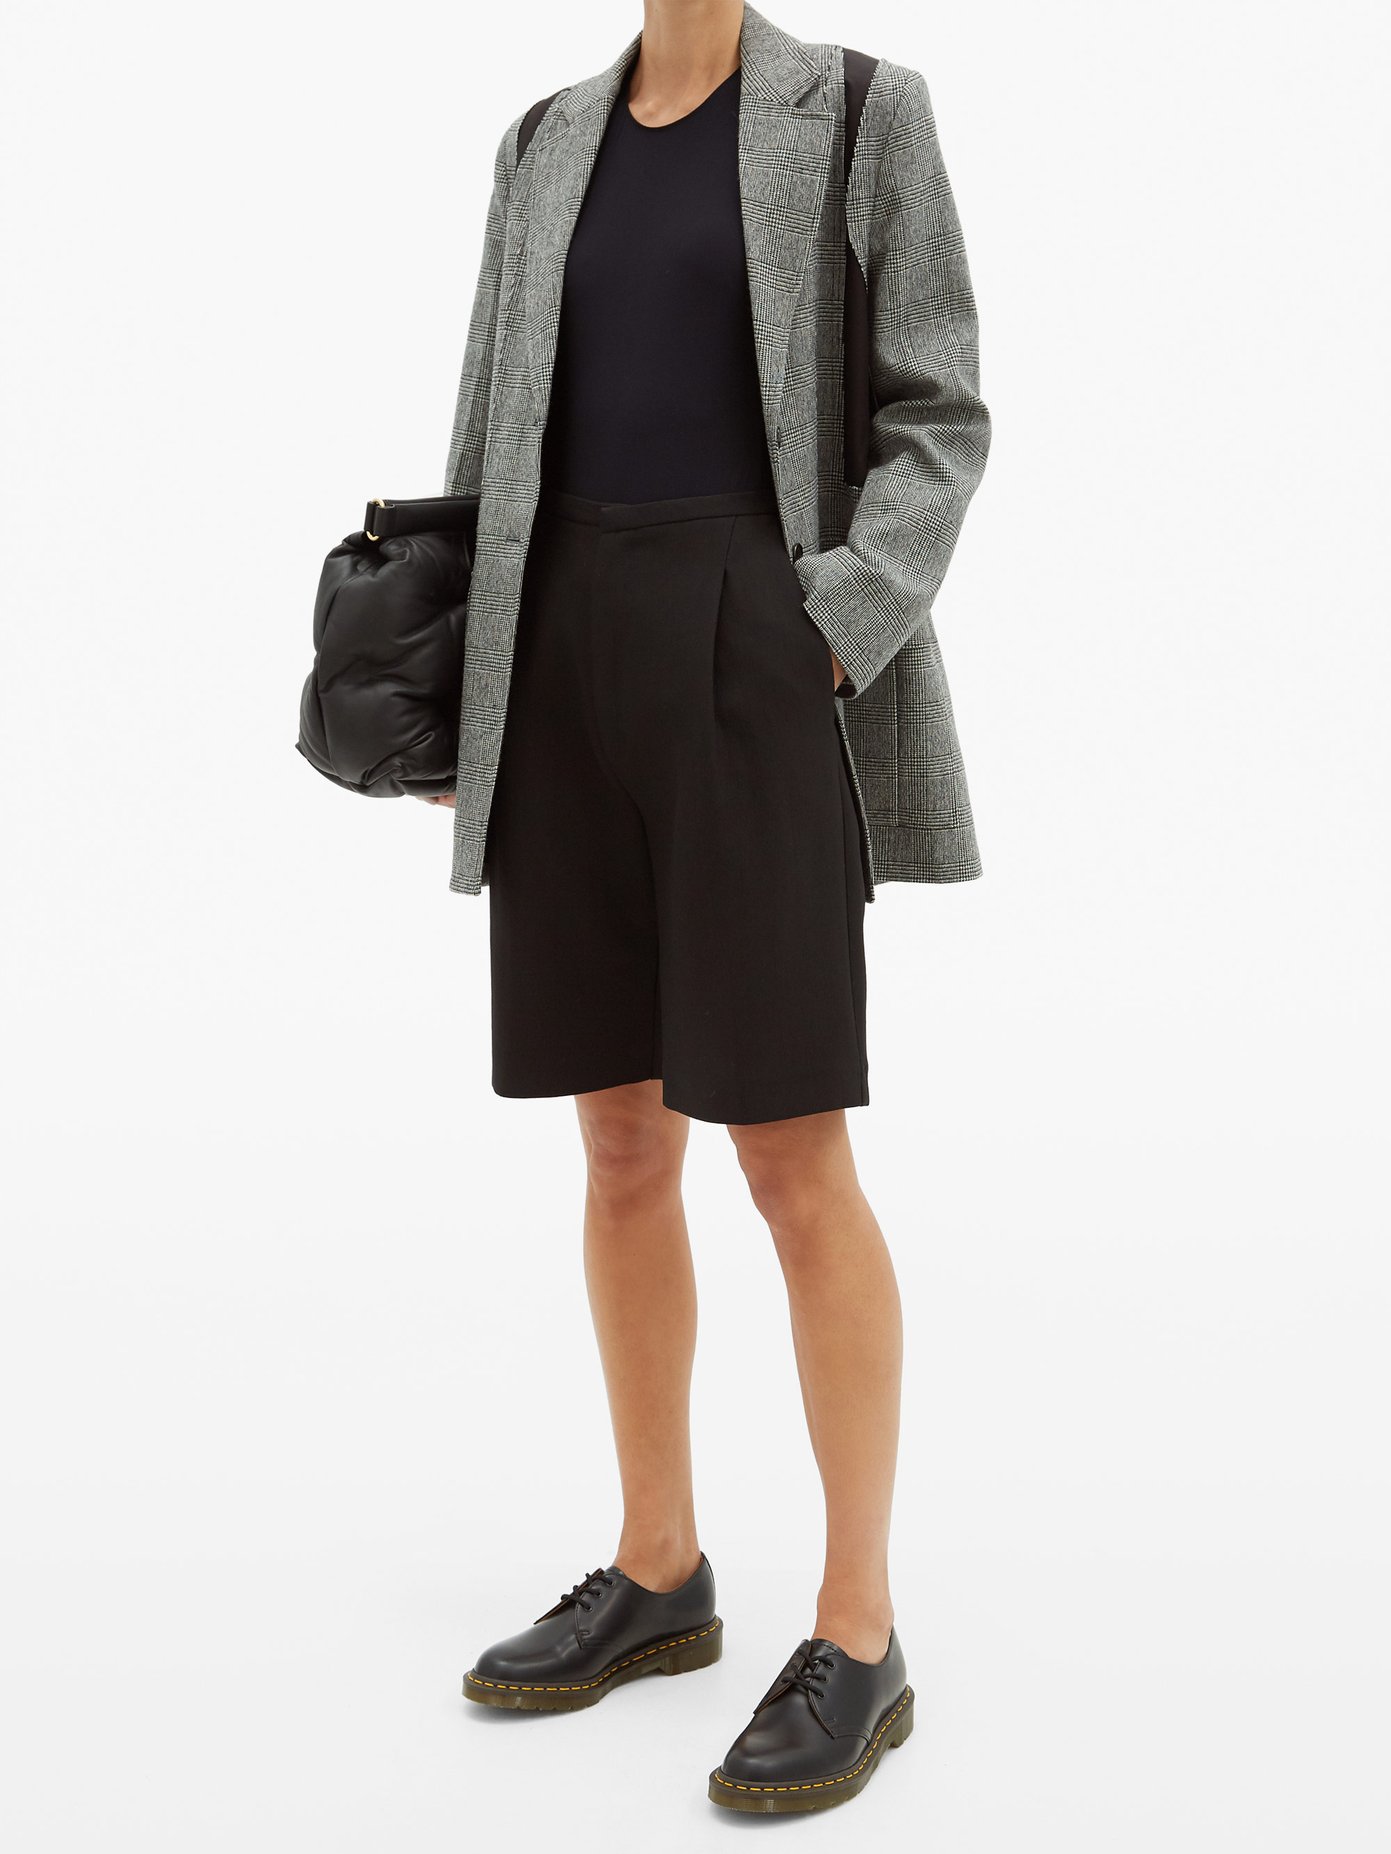 https://assetsprx.matchesfashion.com/img/product/outfit_1344895_1_zoom.jpg